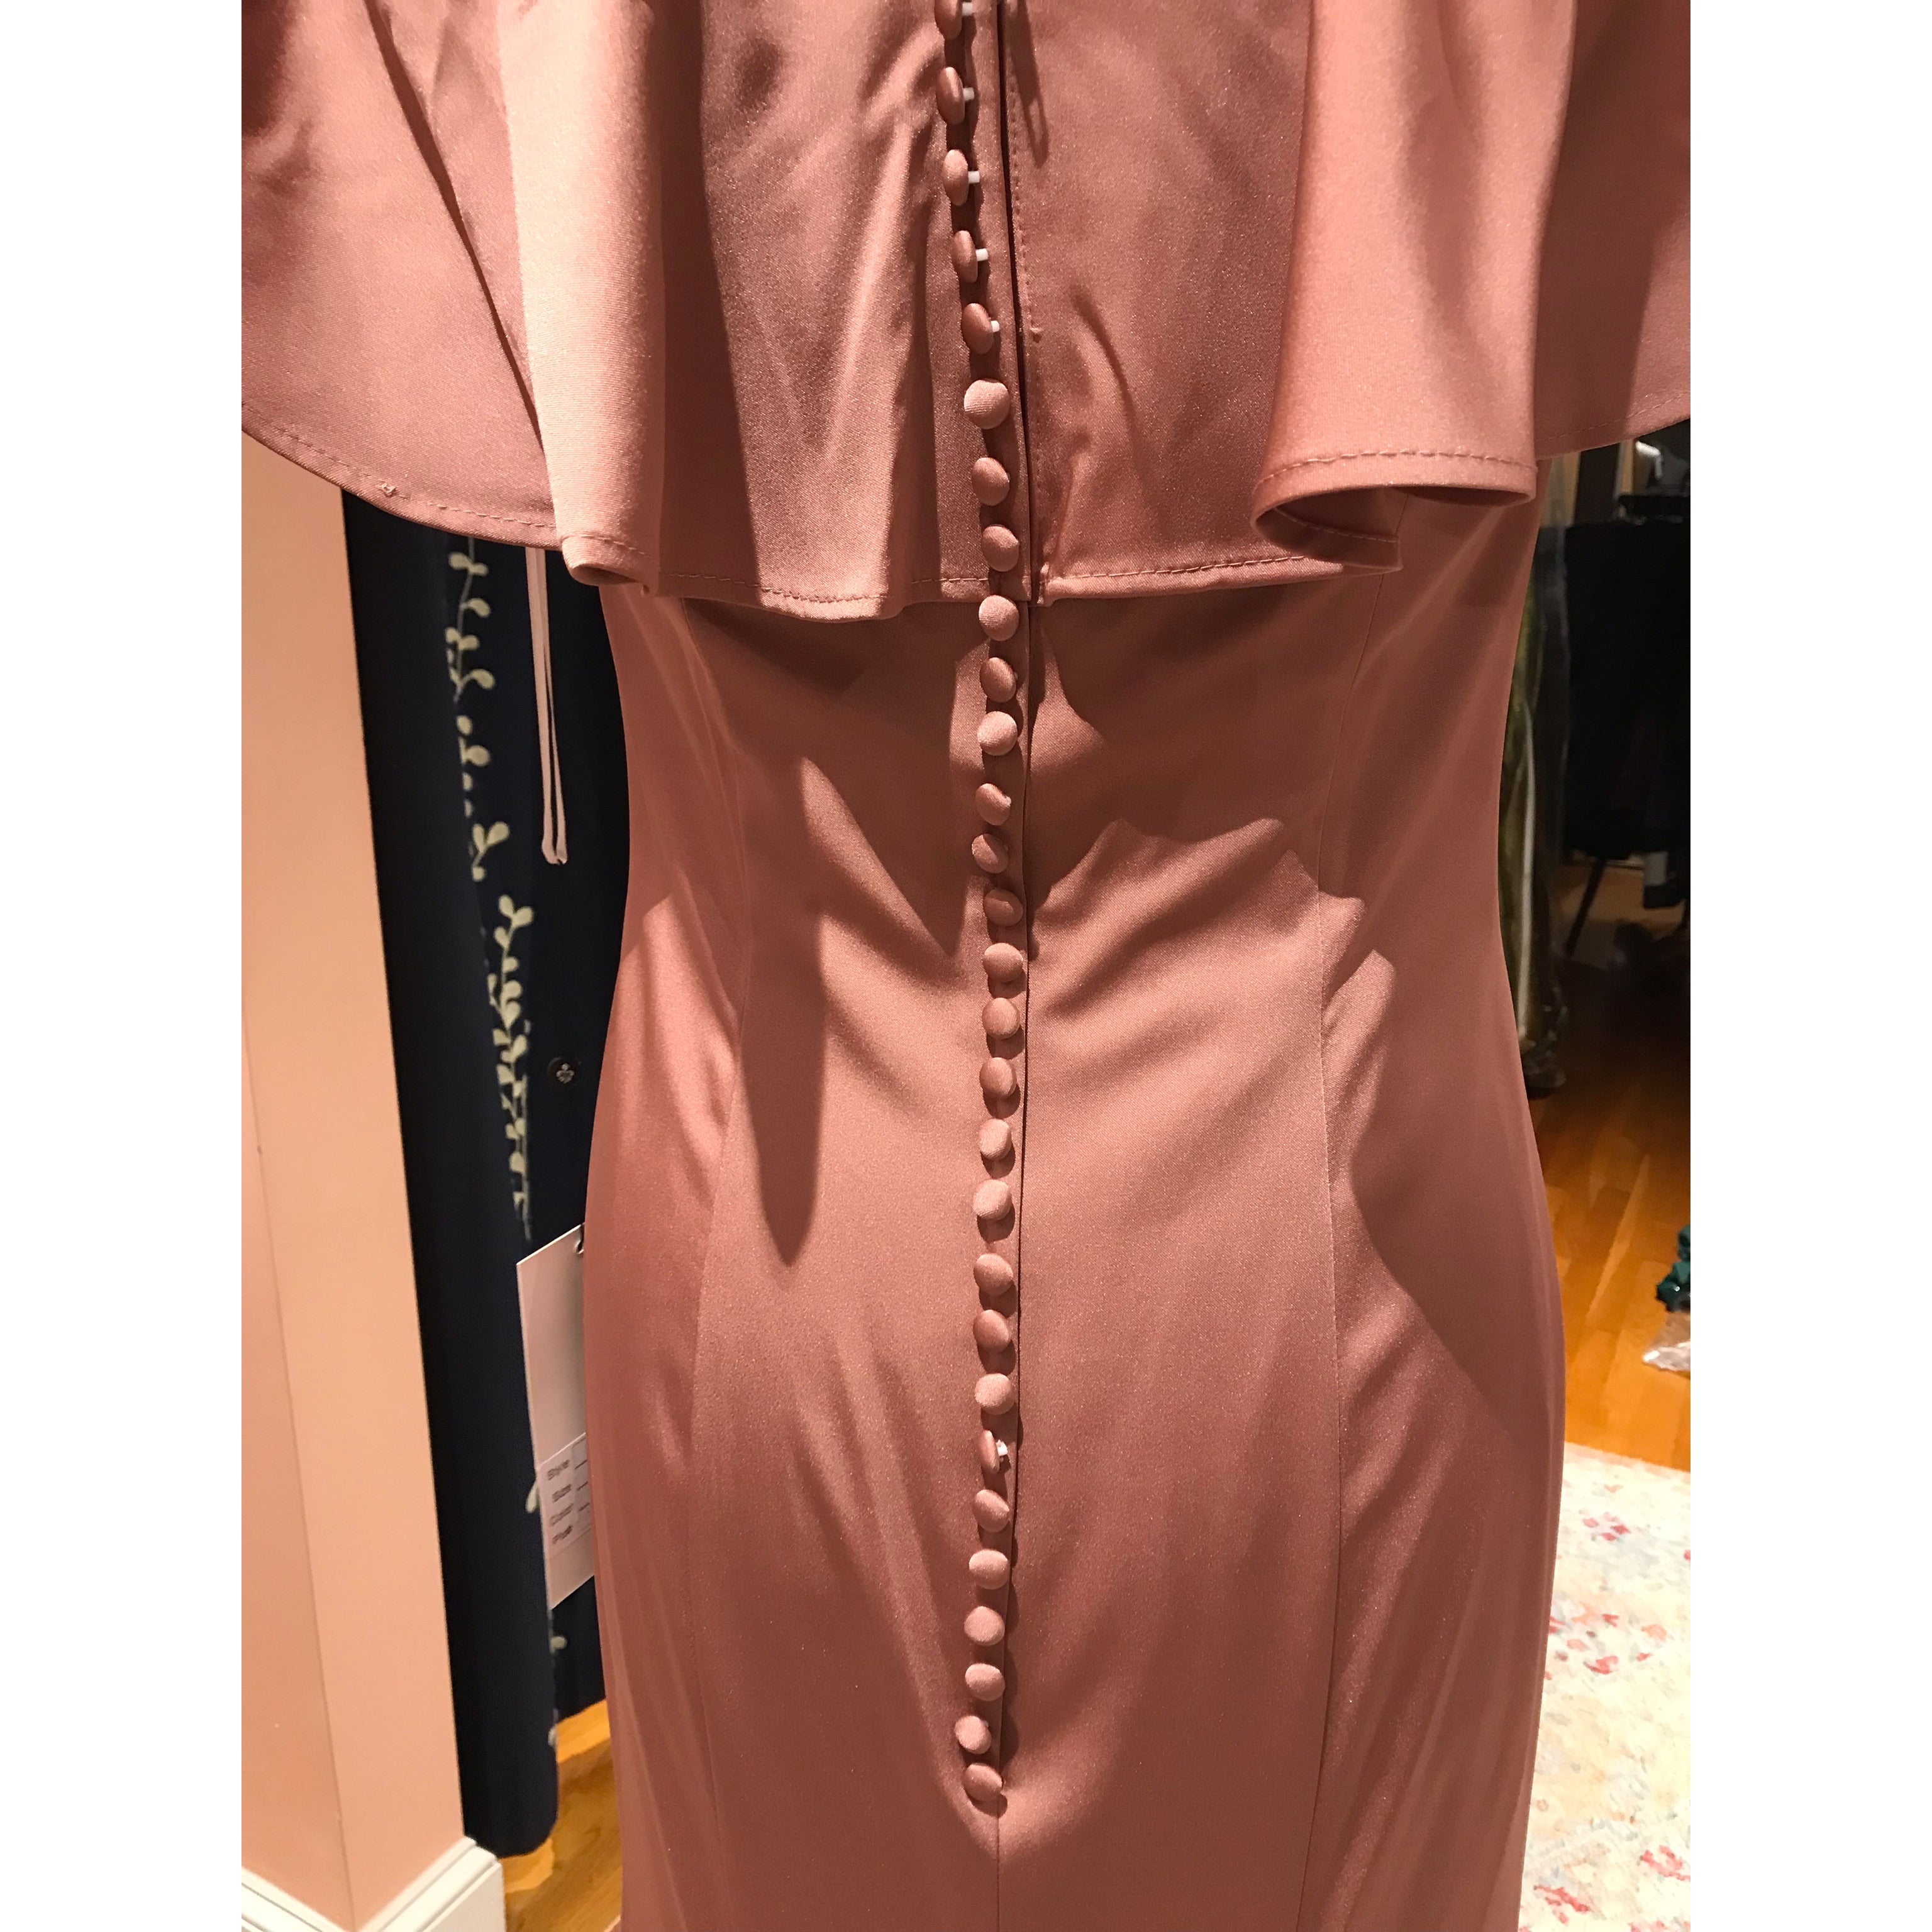 Alyce dusty rose dress, size 4, NEW WITH TAGS!